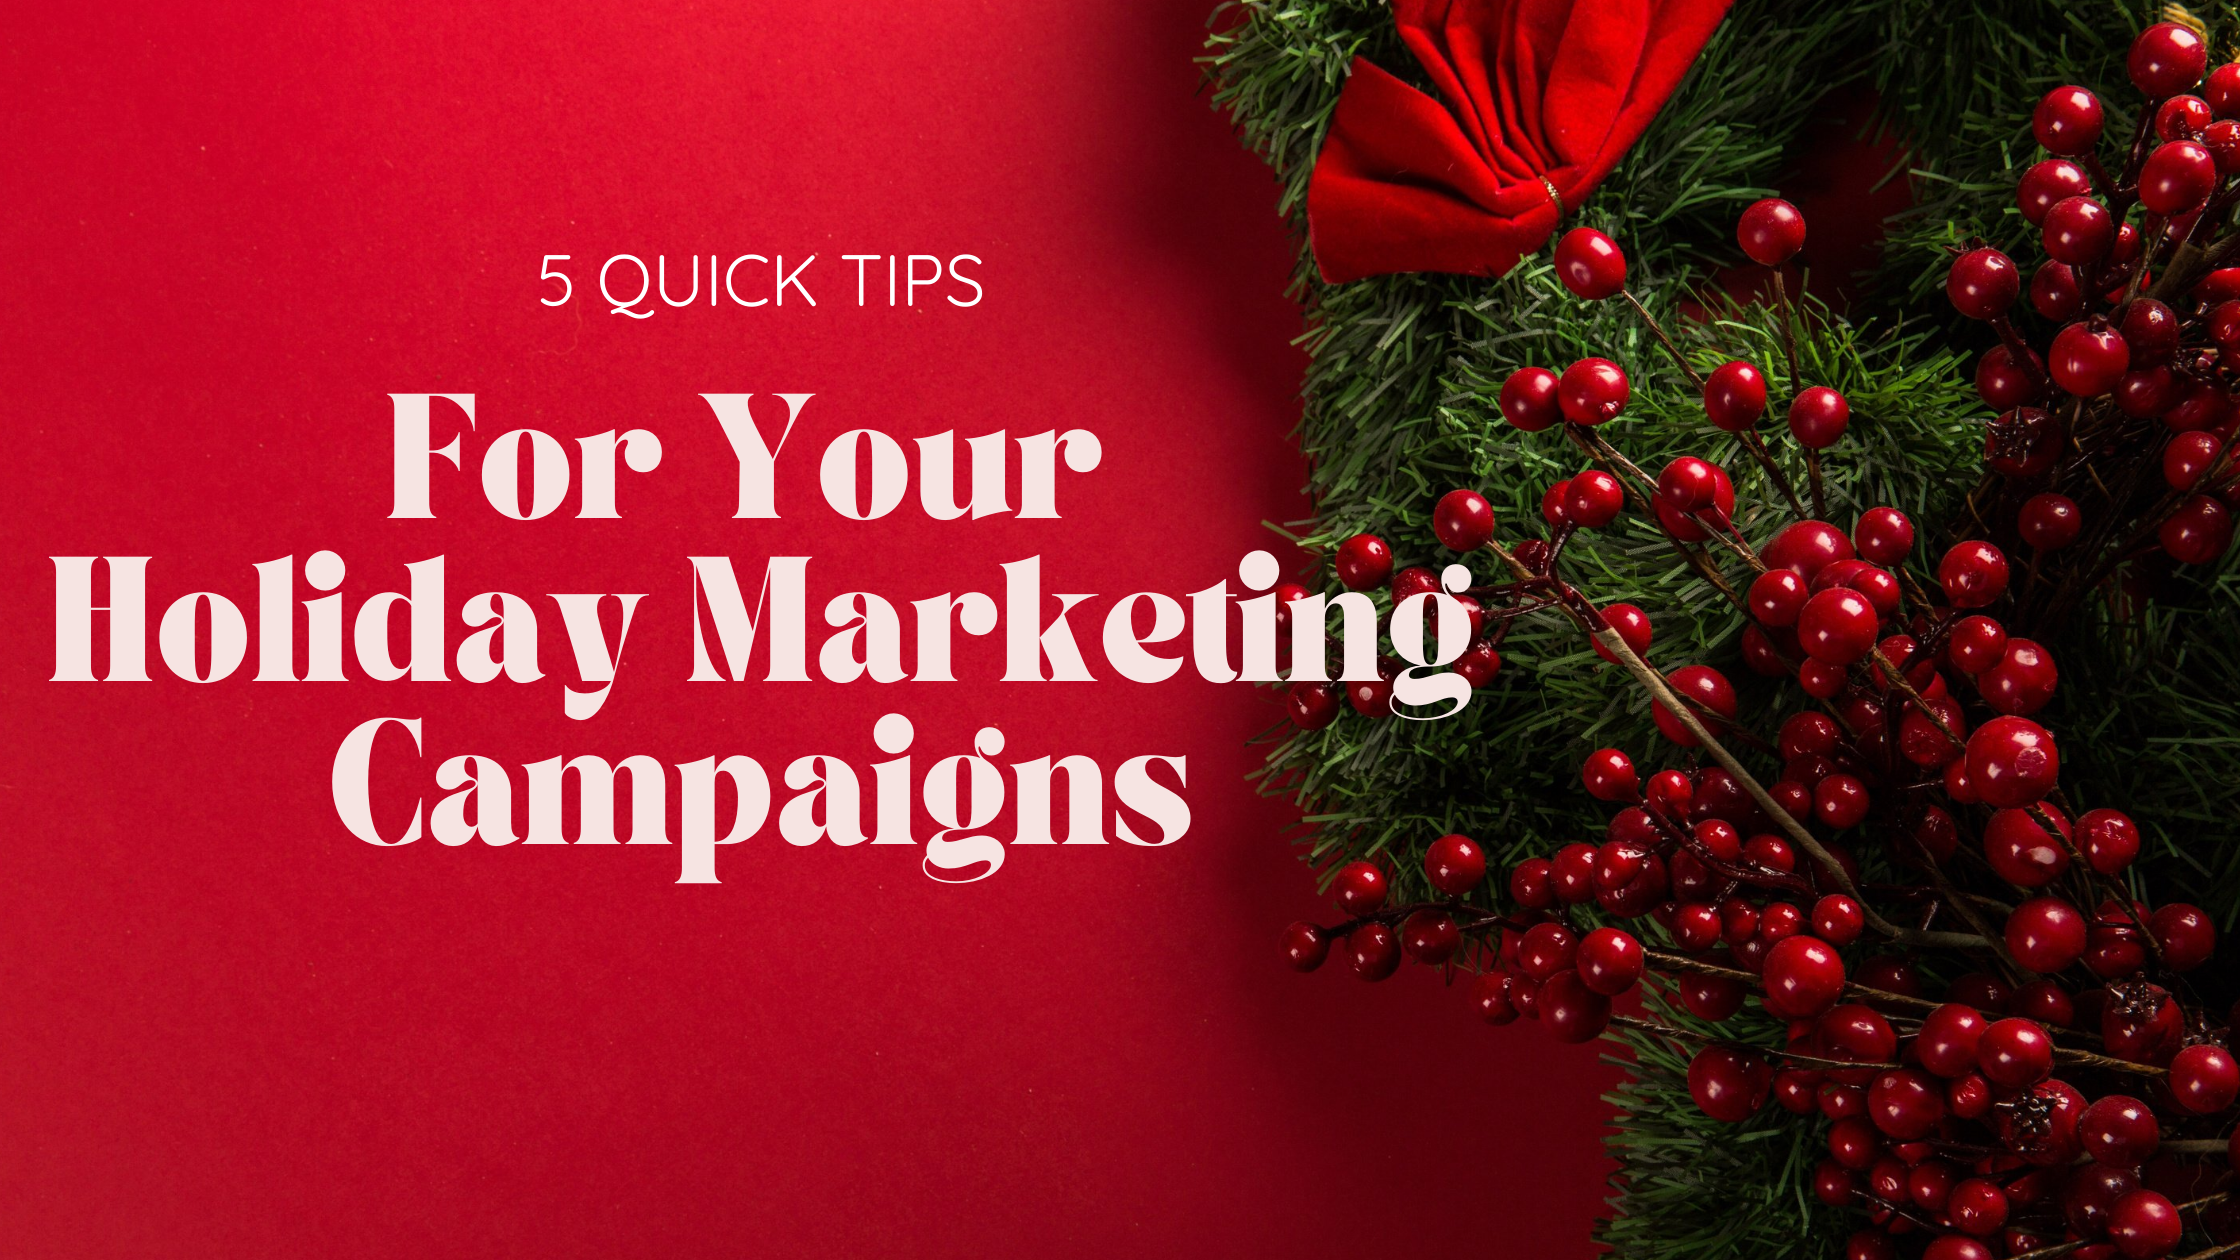 5 Quick Tips For Your Holiday Marketing Campaigns